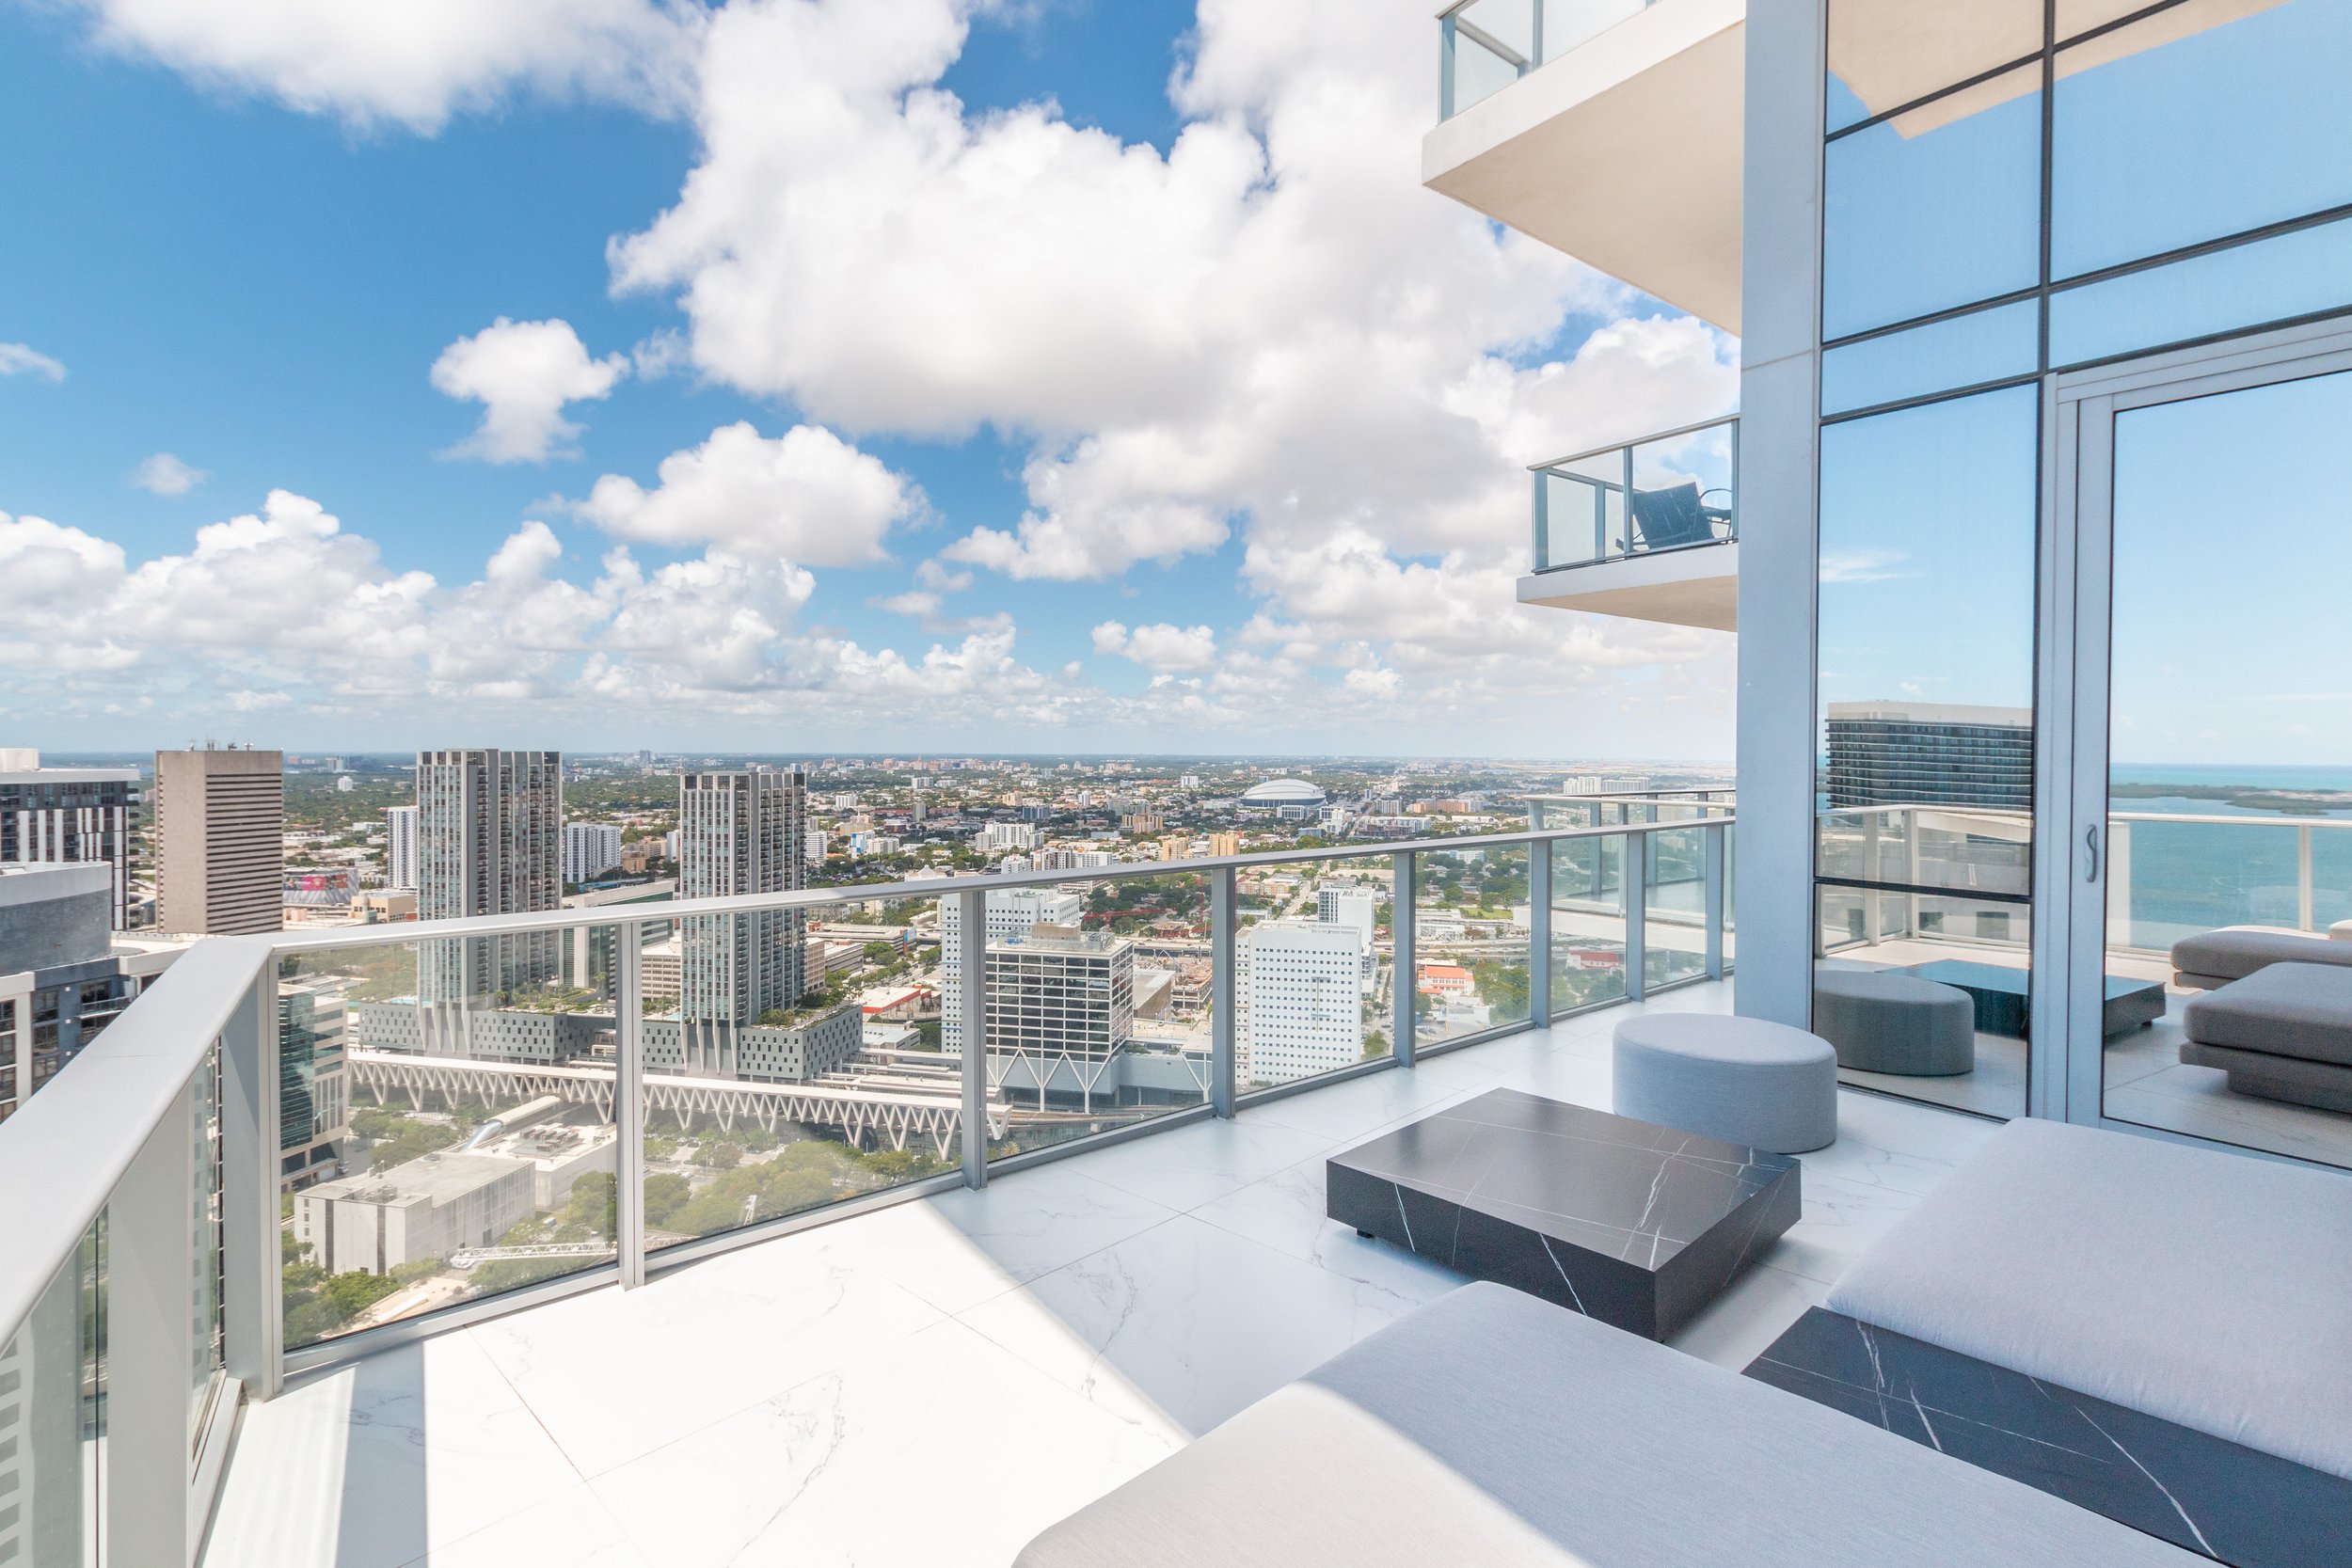 Step Inside A Sky-High Ultra-Luxe Penthouse At PARAMOUNT Miami Worldcenter For Rent Asking $40K Per Month ALTARA Properties Scott Lawrence Porter 1.36.jpg